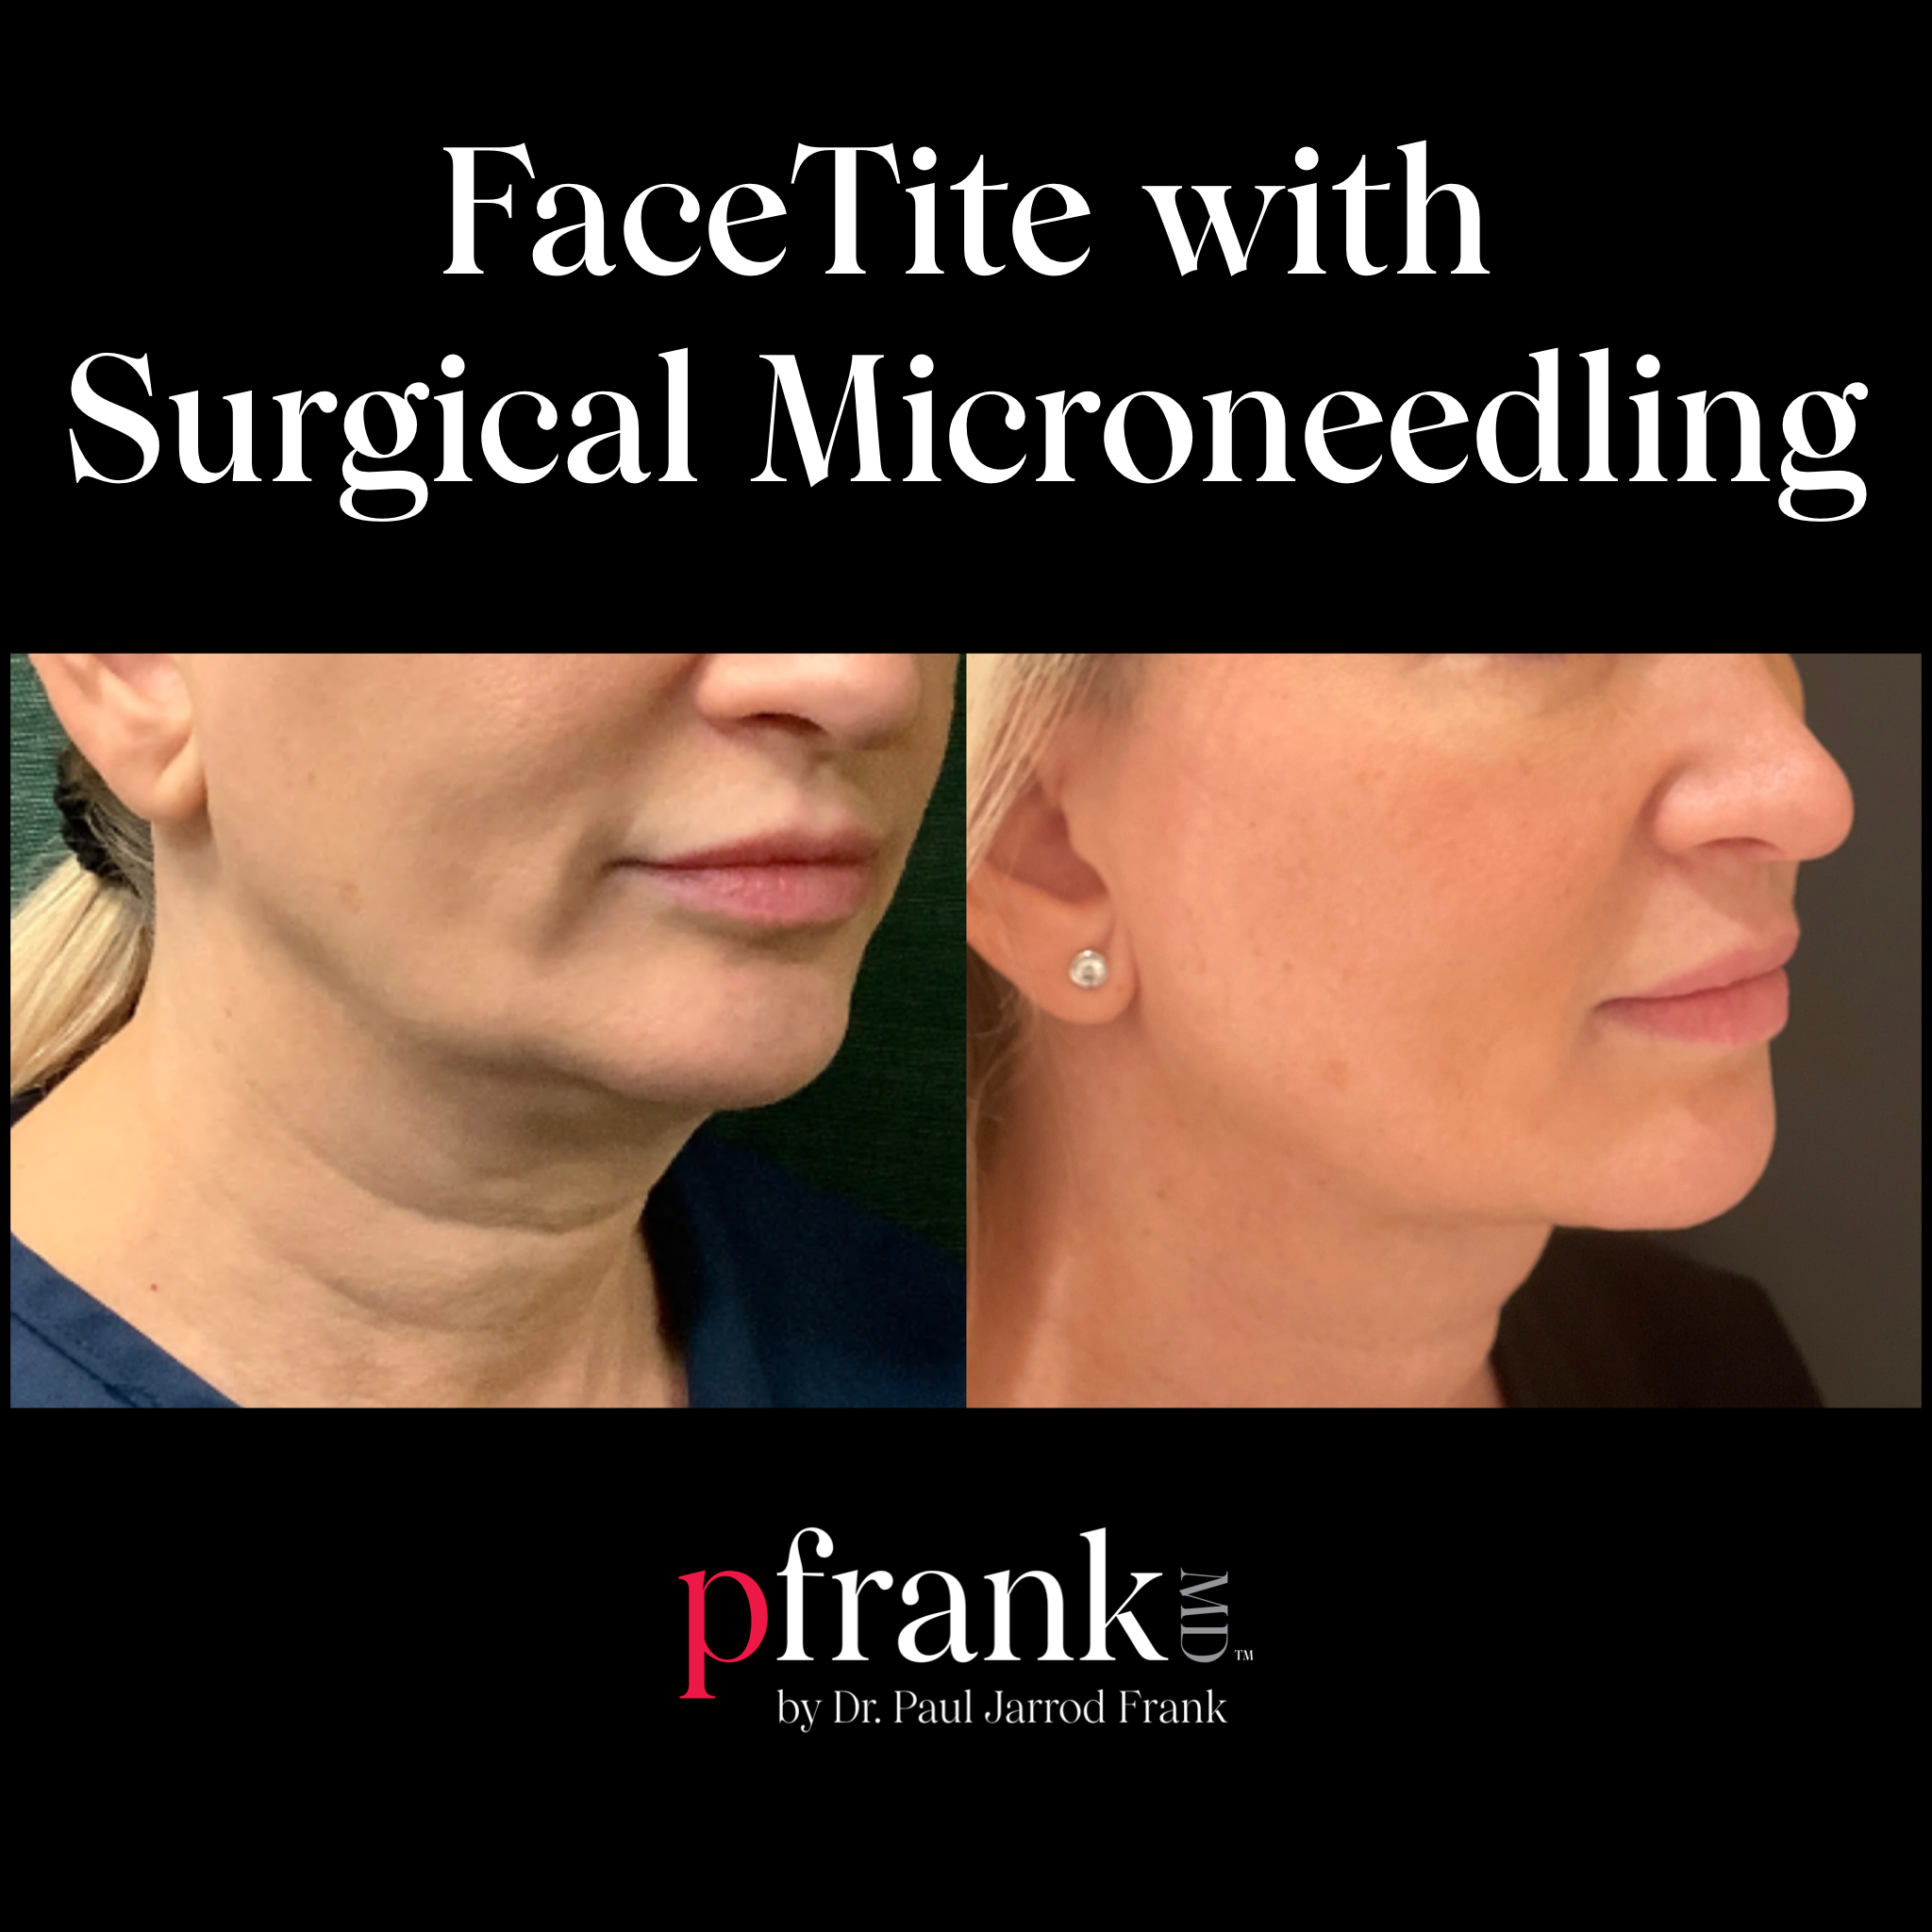 Facetite with Surgical Microneedling Before and After Results